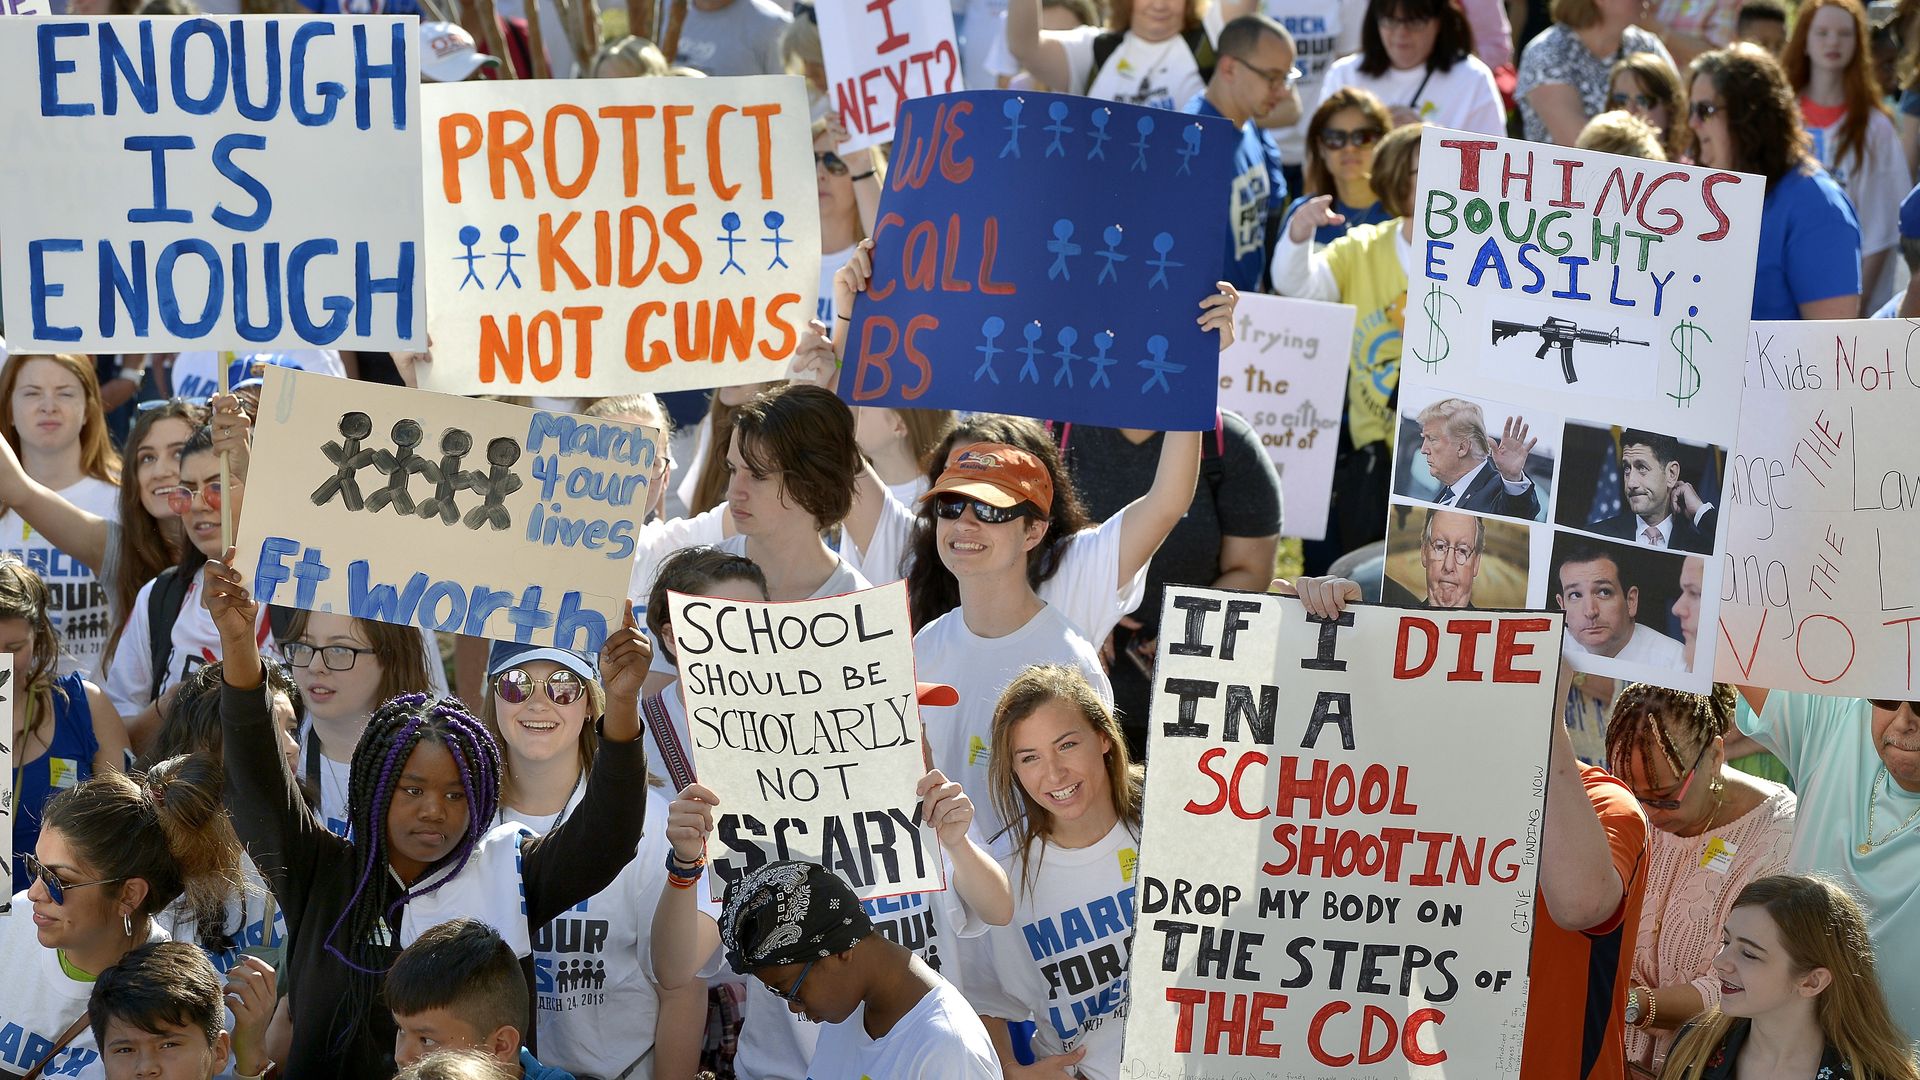 Students with signs advocating against gun violence